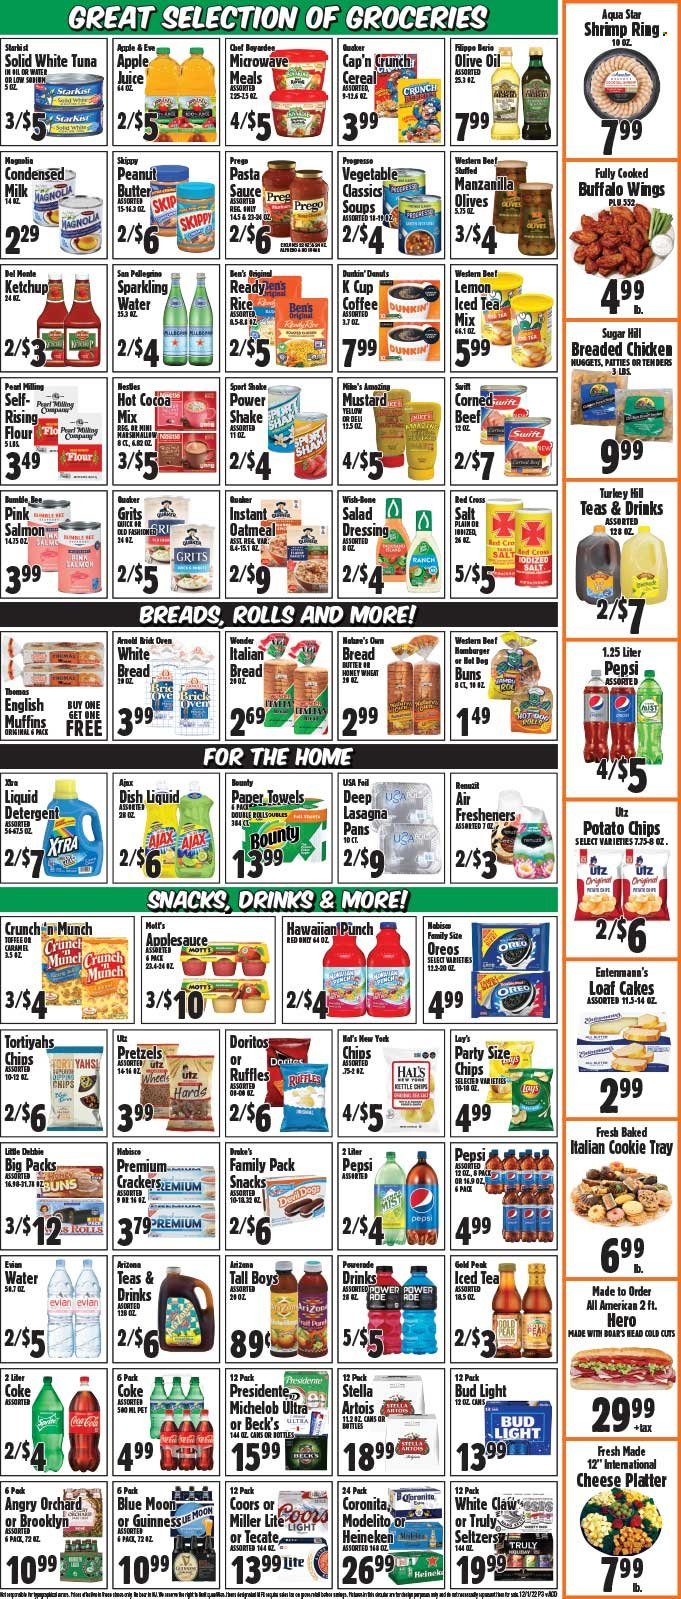 thumbnail - Western Beef Flyer - 12/01/2022 - 12/07/2022 - Sales products - bread, white bread, pretzels, buns, donut, muffin, Dunkin' Donuts, Entenmann's, pears, Mott's, salmon, tuna, shrimps, StarKist, pasta sauce, Bumble Bee, sauce, fried chicken, Quaker, Progresso, lasagna meal, Oreo, milk, condensed milk, shake, marshmallows, snack, Bounty, toffee, crackers, Doritos, potato chips, chips, Lay’s, Ruffles, flour, sugar, oatmeal, grits, olives, Chef Boyardee, Del Monte, cereals, Cap'n Crunch, caramel, mustard, salad dressing, ketchup, dressing, olive oil, oil, apple sauce, peanut butter, Coca-Cola, Powerade, Pepsi, juice, ice tea, AriZona, sparkling water, San Pellegrino, hot cocoa, coffee, coffee capsules, K-Cups, White Claw, TRULY, beer, Bud Light, Heineken, Guinness, Beck's, kitchen towels, paper towels, detergent, Ajax, liquid detergent, XTRA, dishwashing liquid, Renuzit, air freshener, Nature's Own, Miller Lite, Stella Artois, Coors, Blue Moon, Michelob. Page 3.